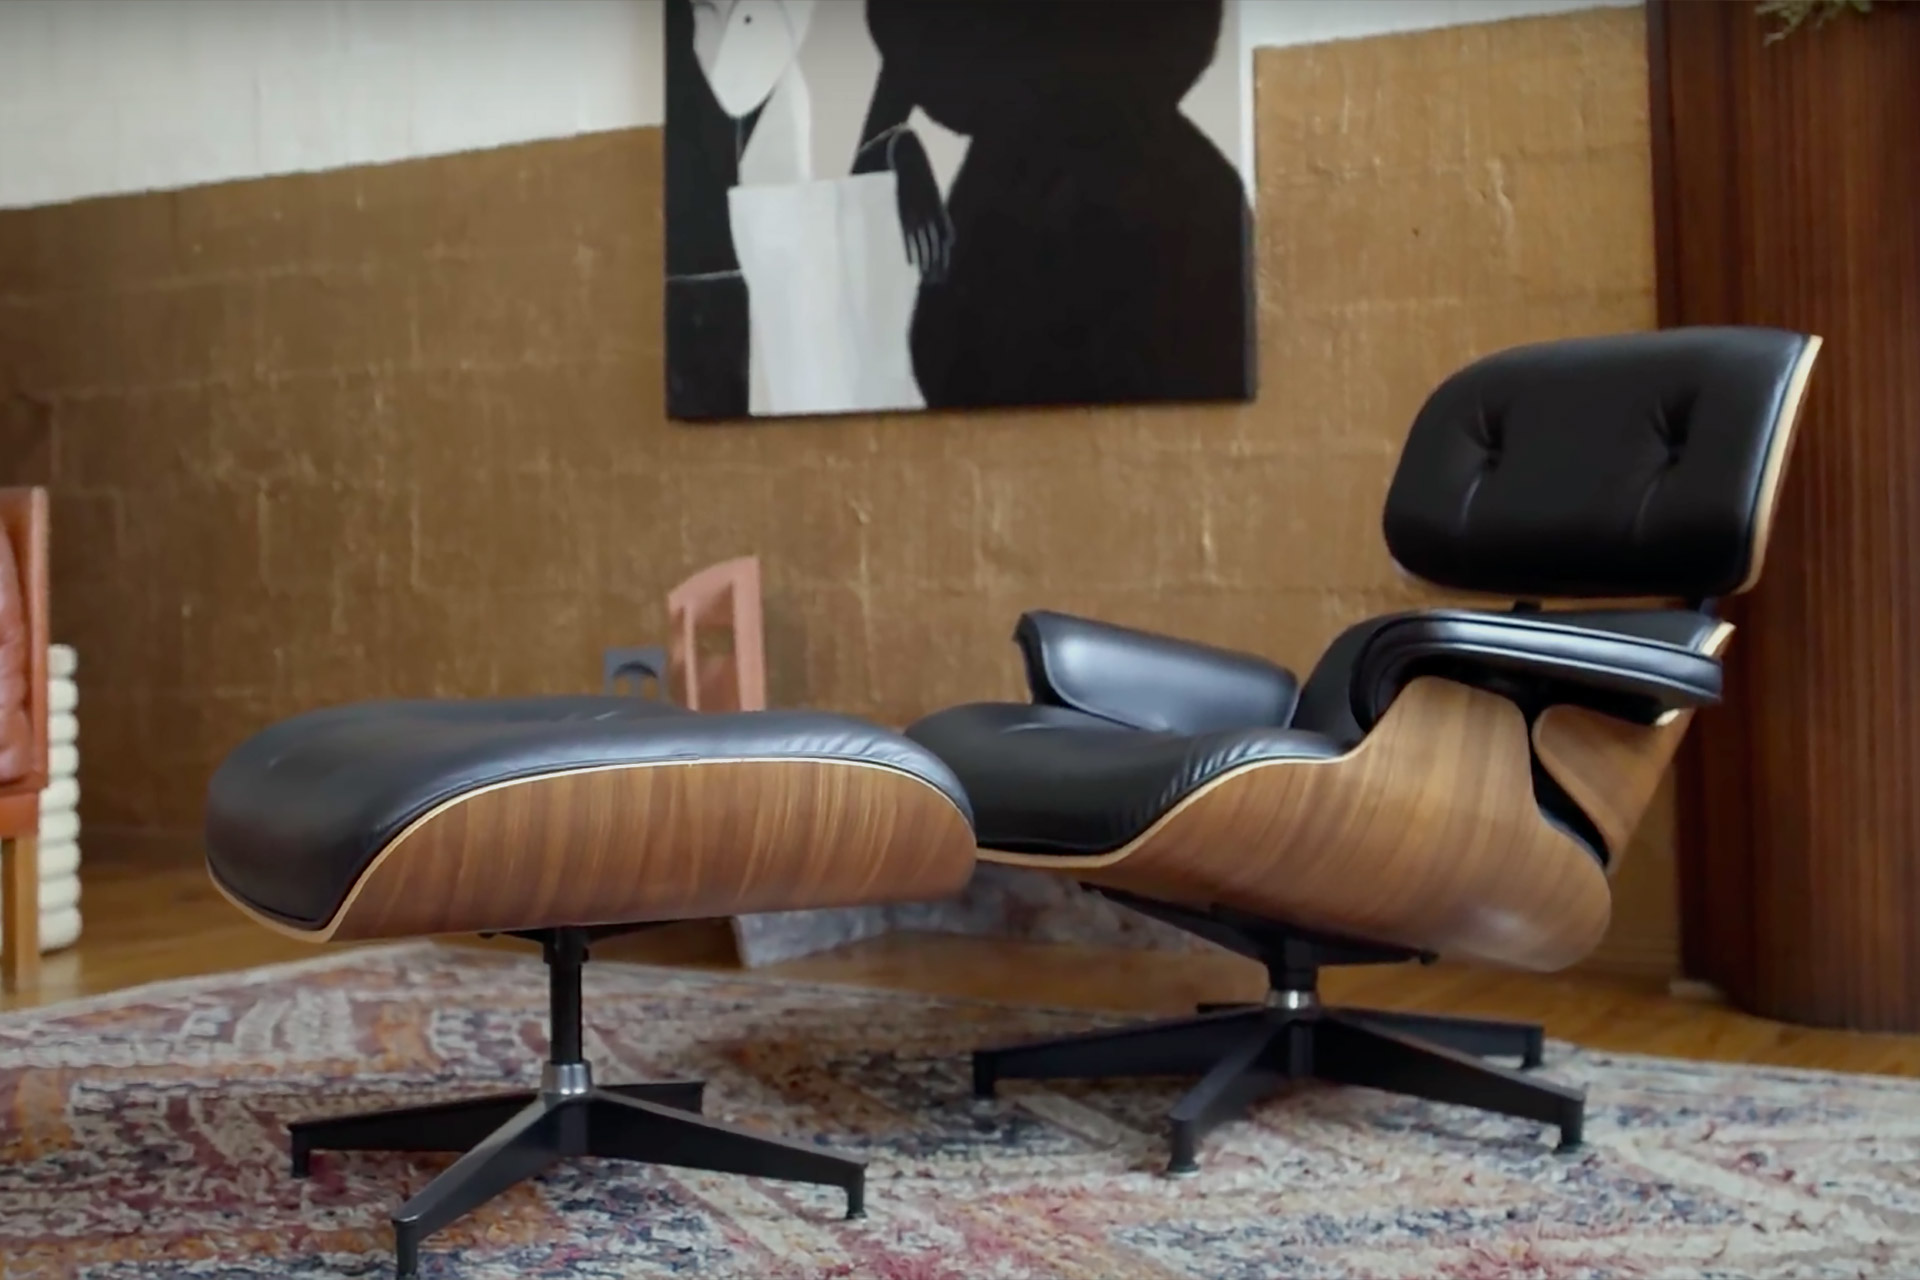 A Love Letter to the Eames Lounge Chair |